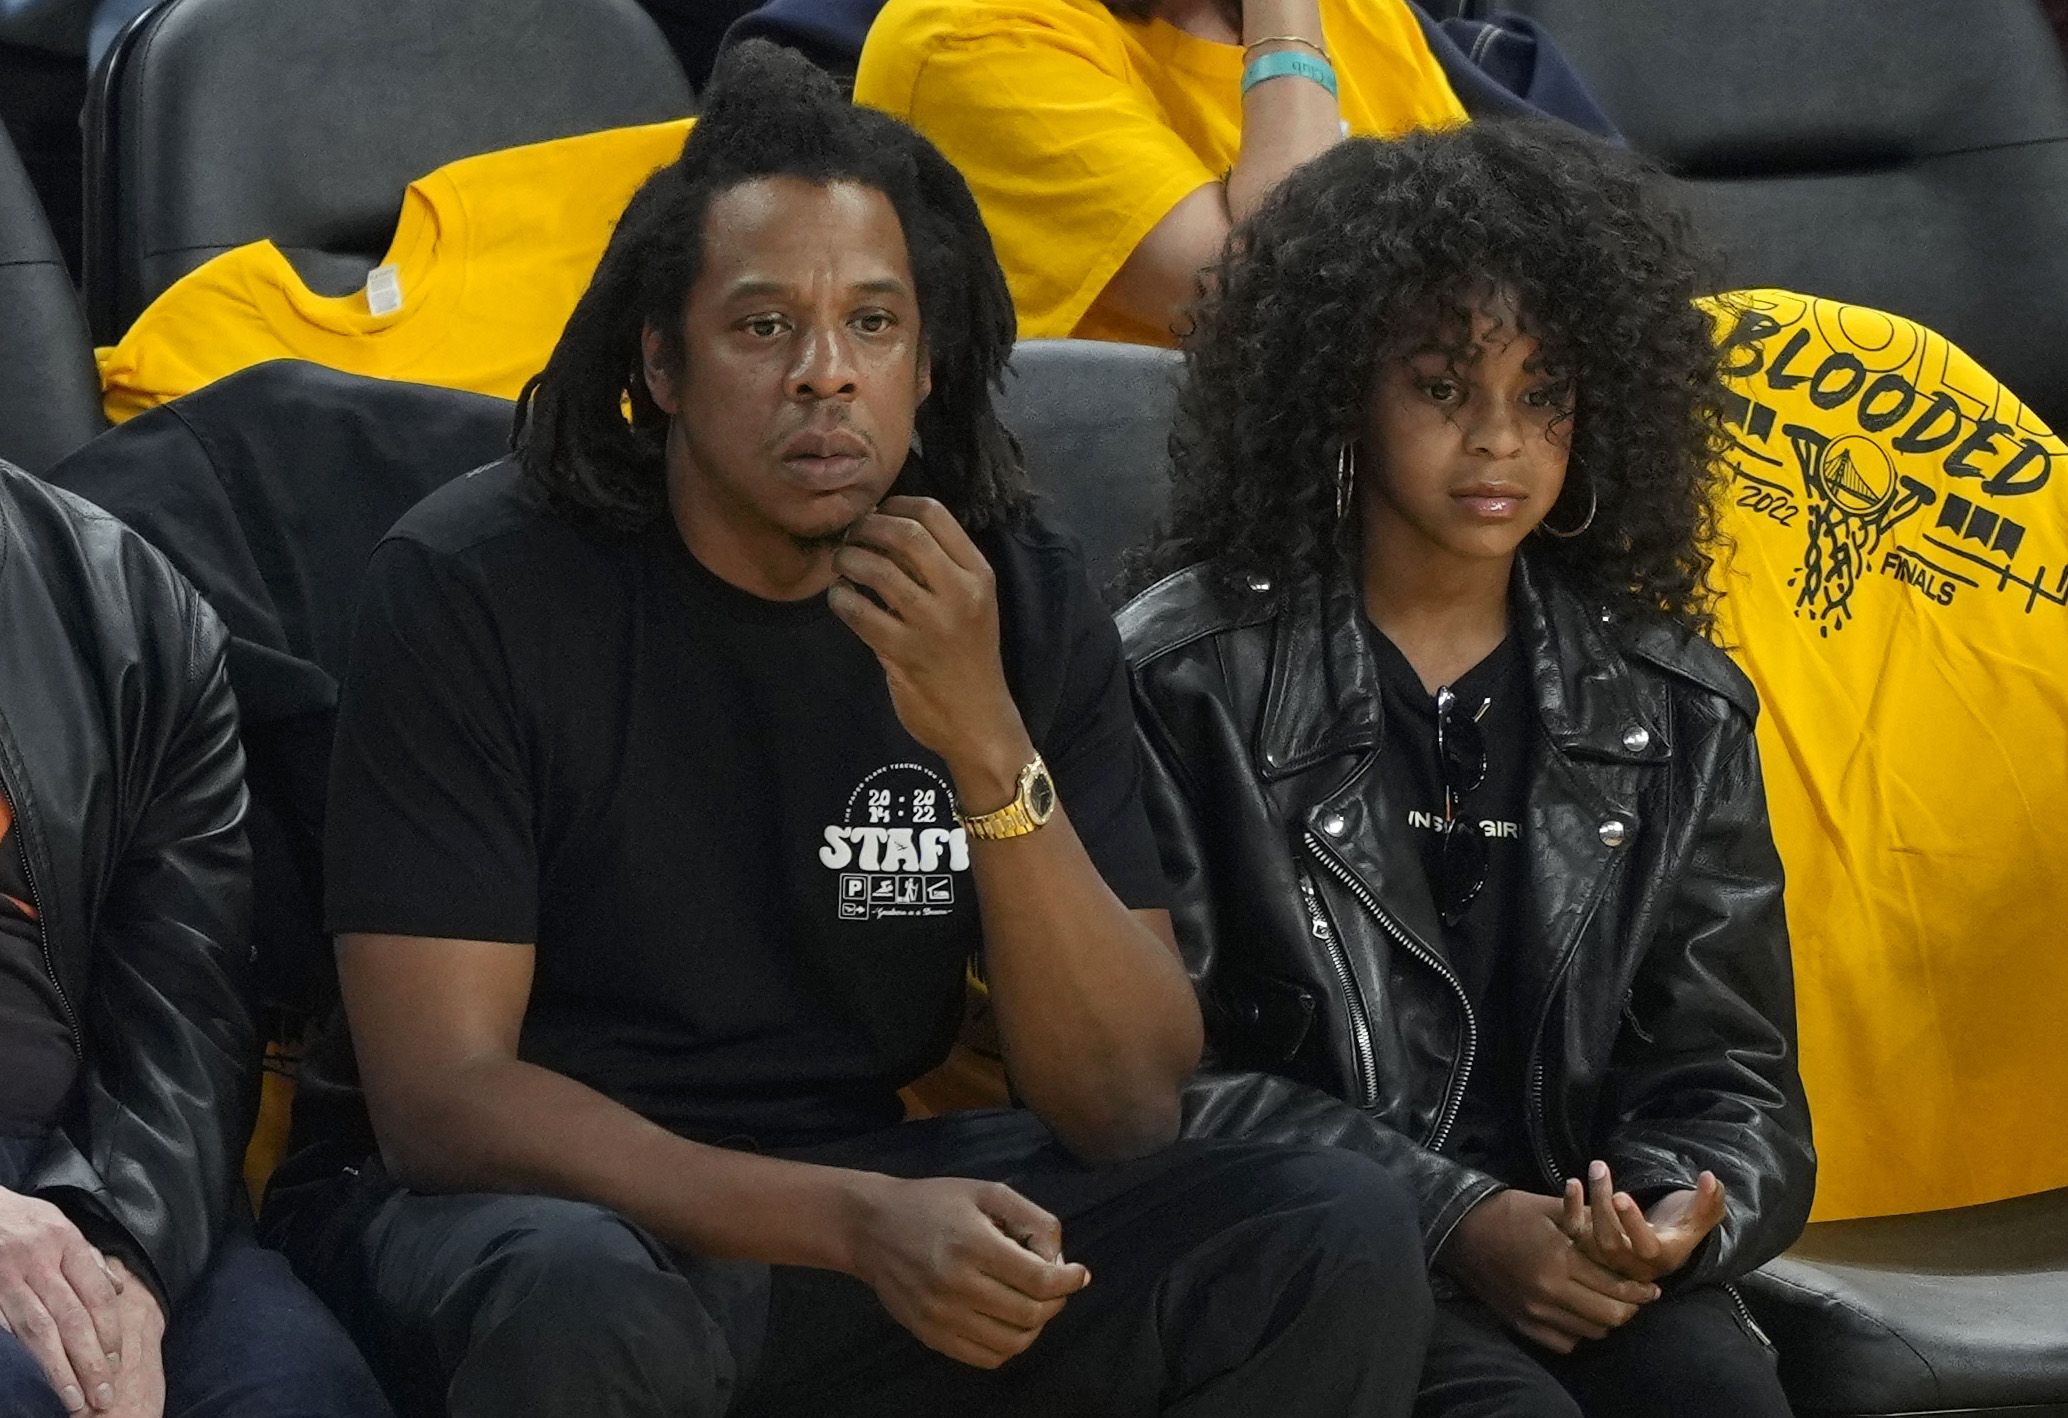 Jay-Z Attends Super Bowl 2022 with Blue Ivy - See Photos!: Photo